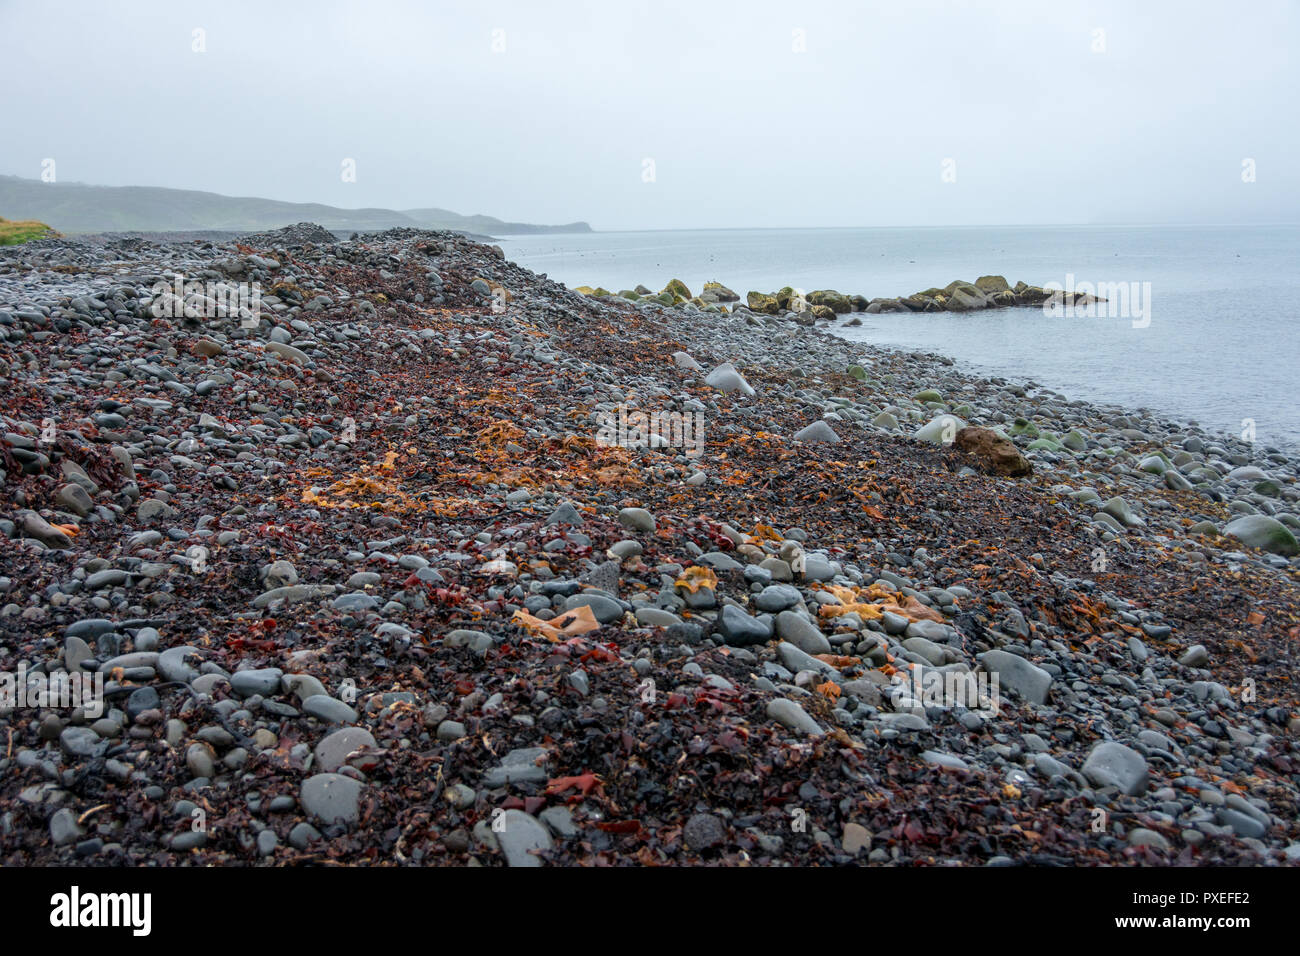 Dramatic beach of black pebbles, green grass, and lagoons on Skagafjordur, North Iceland during blue hour sunset Stock Photo